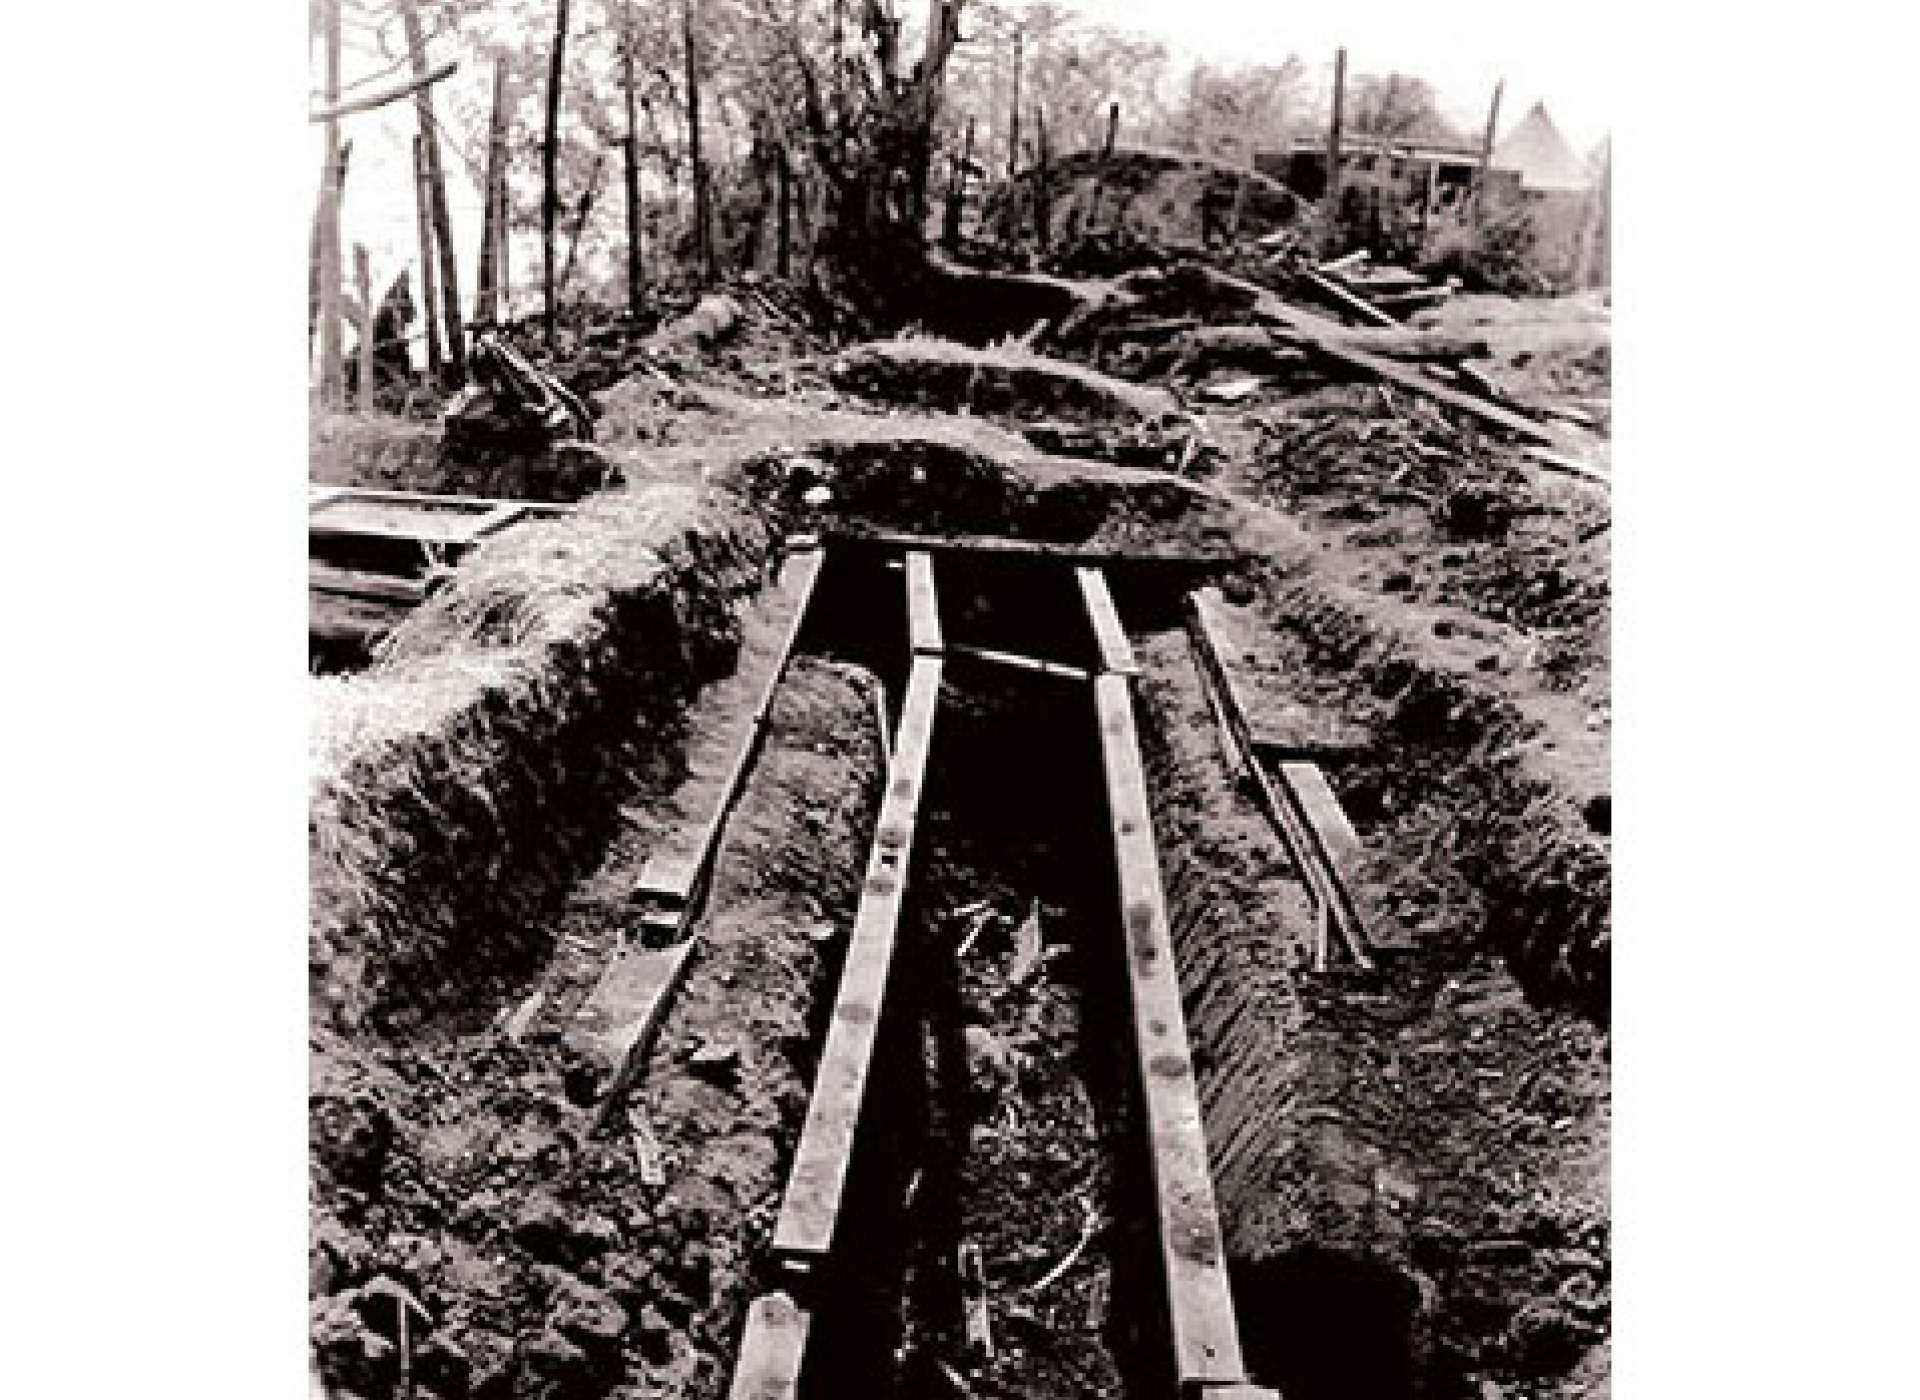 The recovery efforts in the second large shelter at Camp 10-A revealed the bodies of American POWs burned to death in the trench. Courtesy of the US Army.